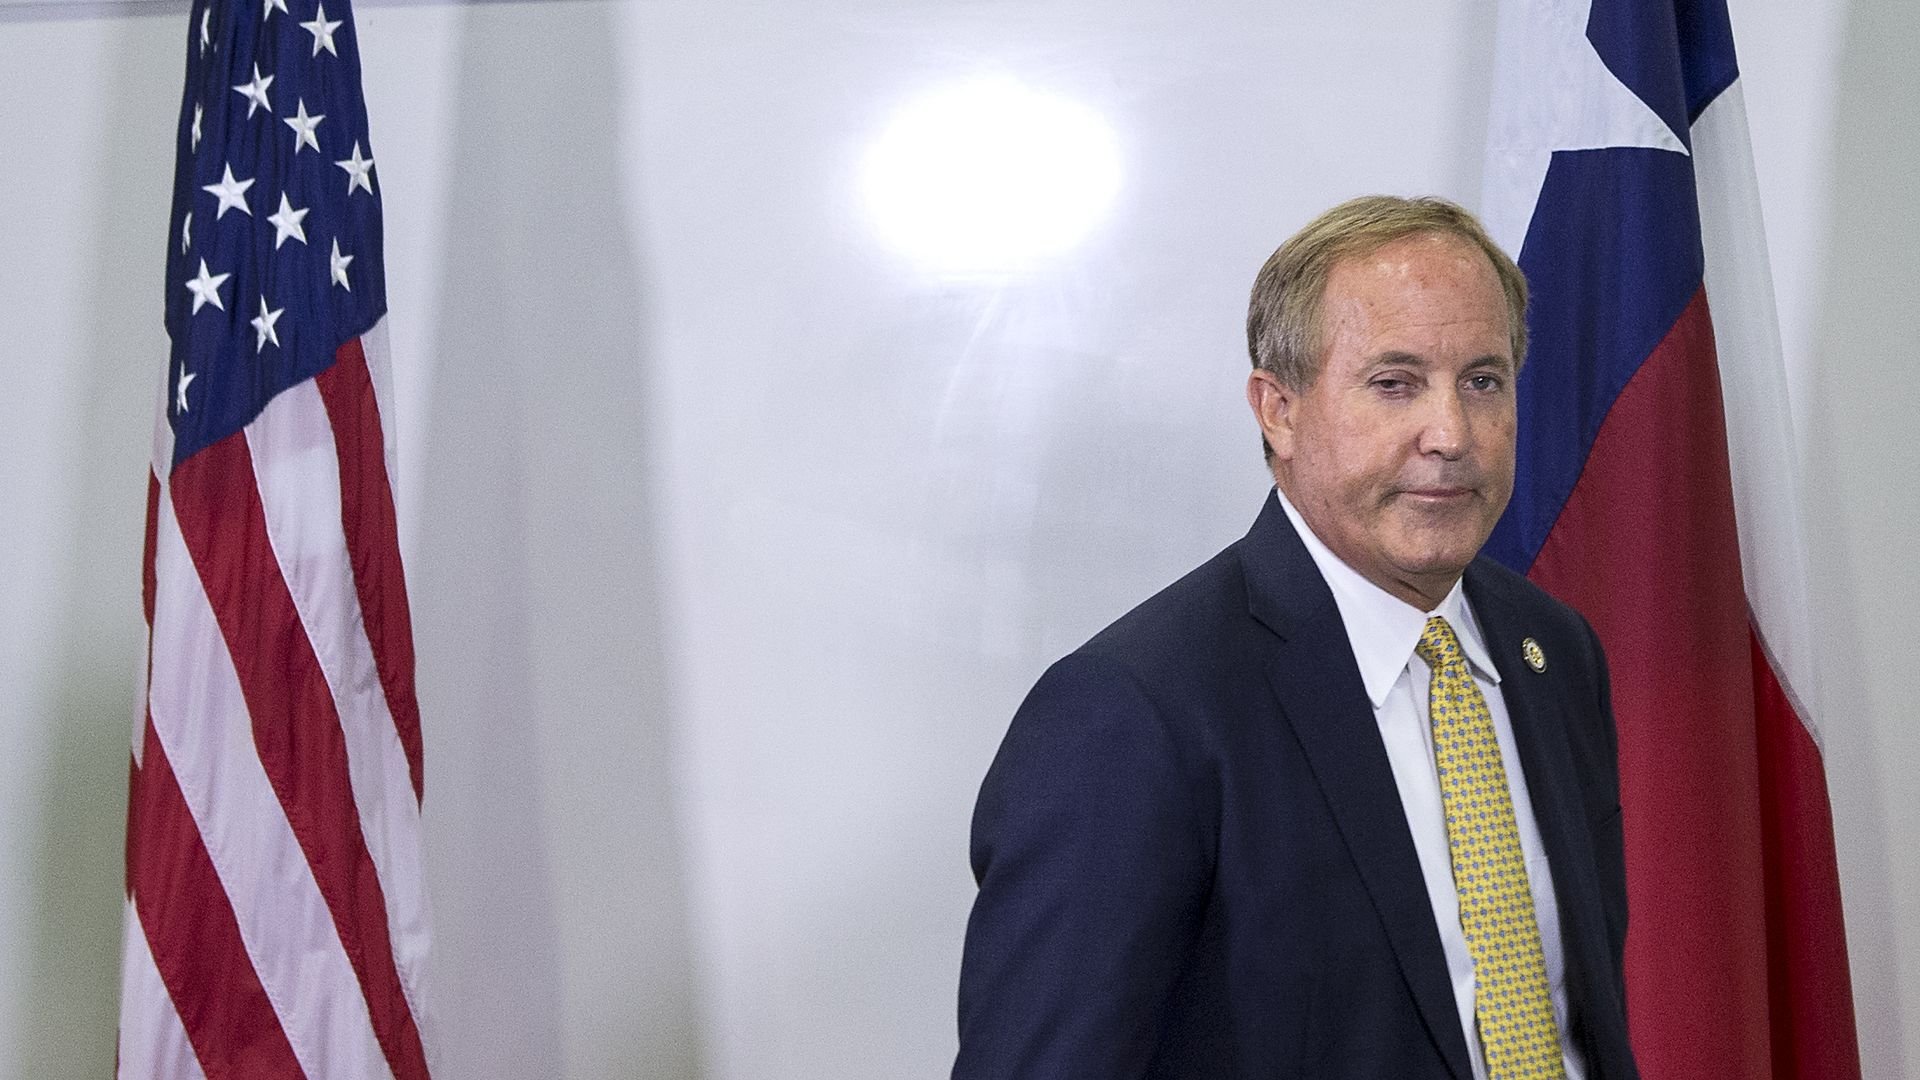 Read: Texas lawmakers file 20 articles of impeachment against Ken Paxton